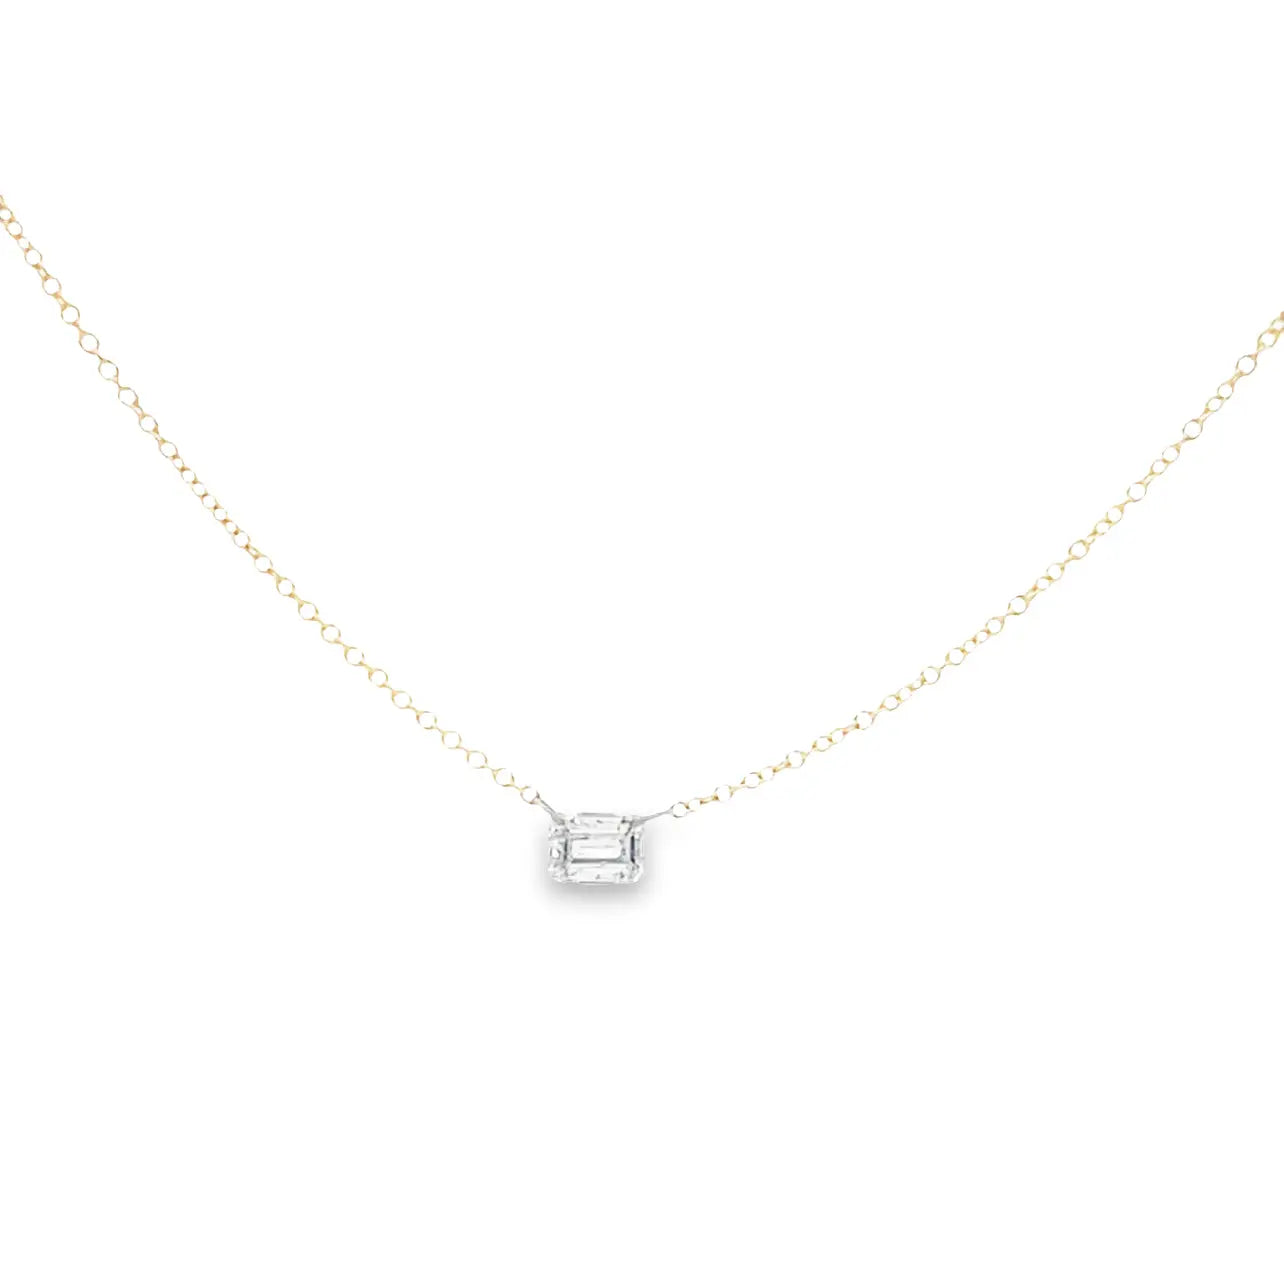 Emerald Cut Diamond Necklace TAP by Todd Pownell